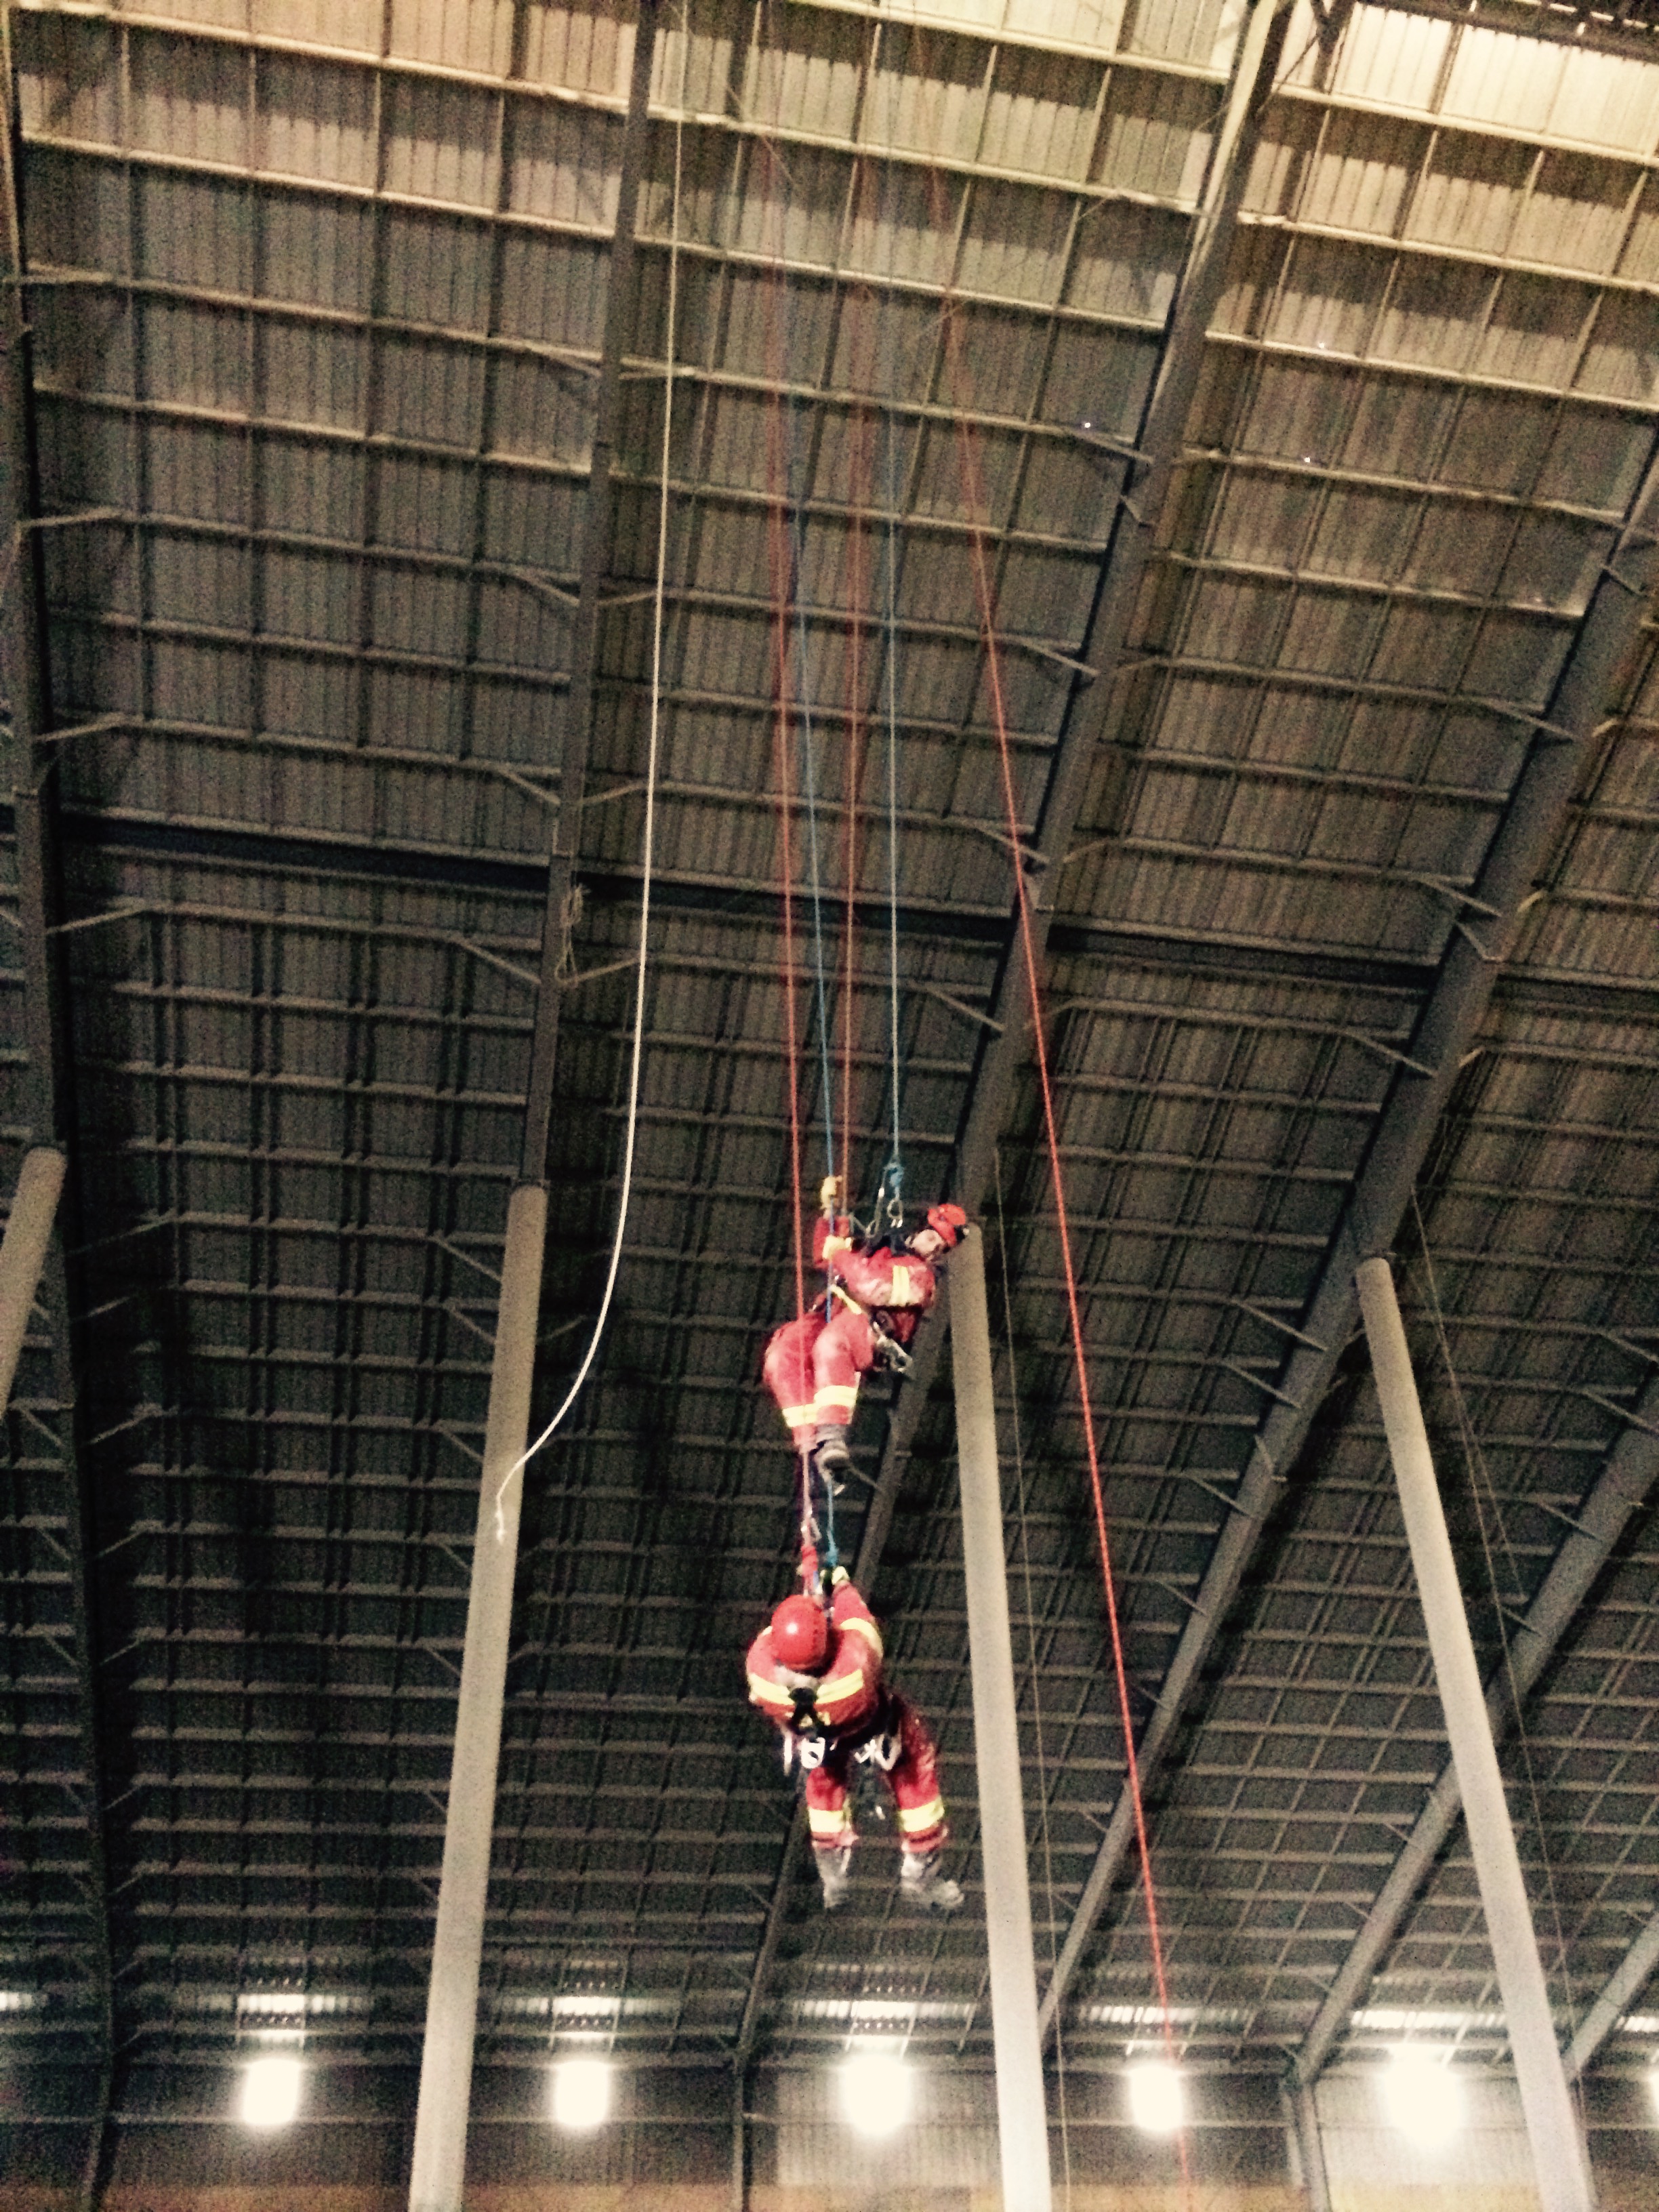 Photo was taken during a Rope Rescue System Pick-off Garret Kaminskis was instructing near Fargo, ND.